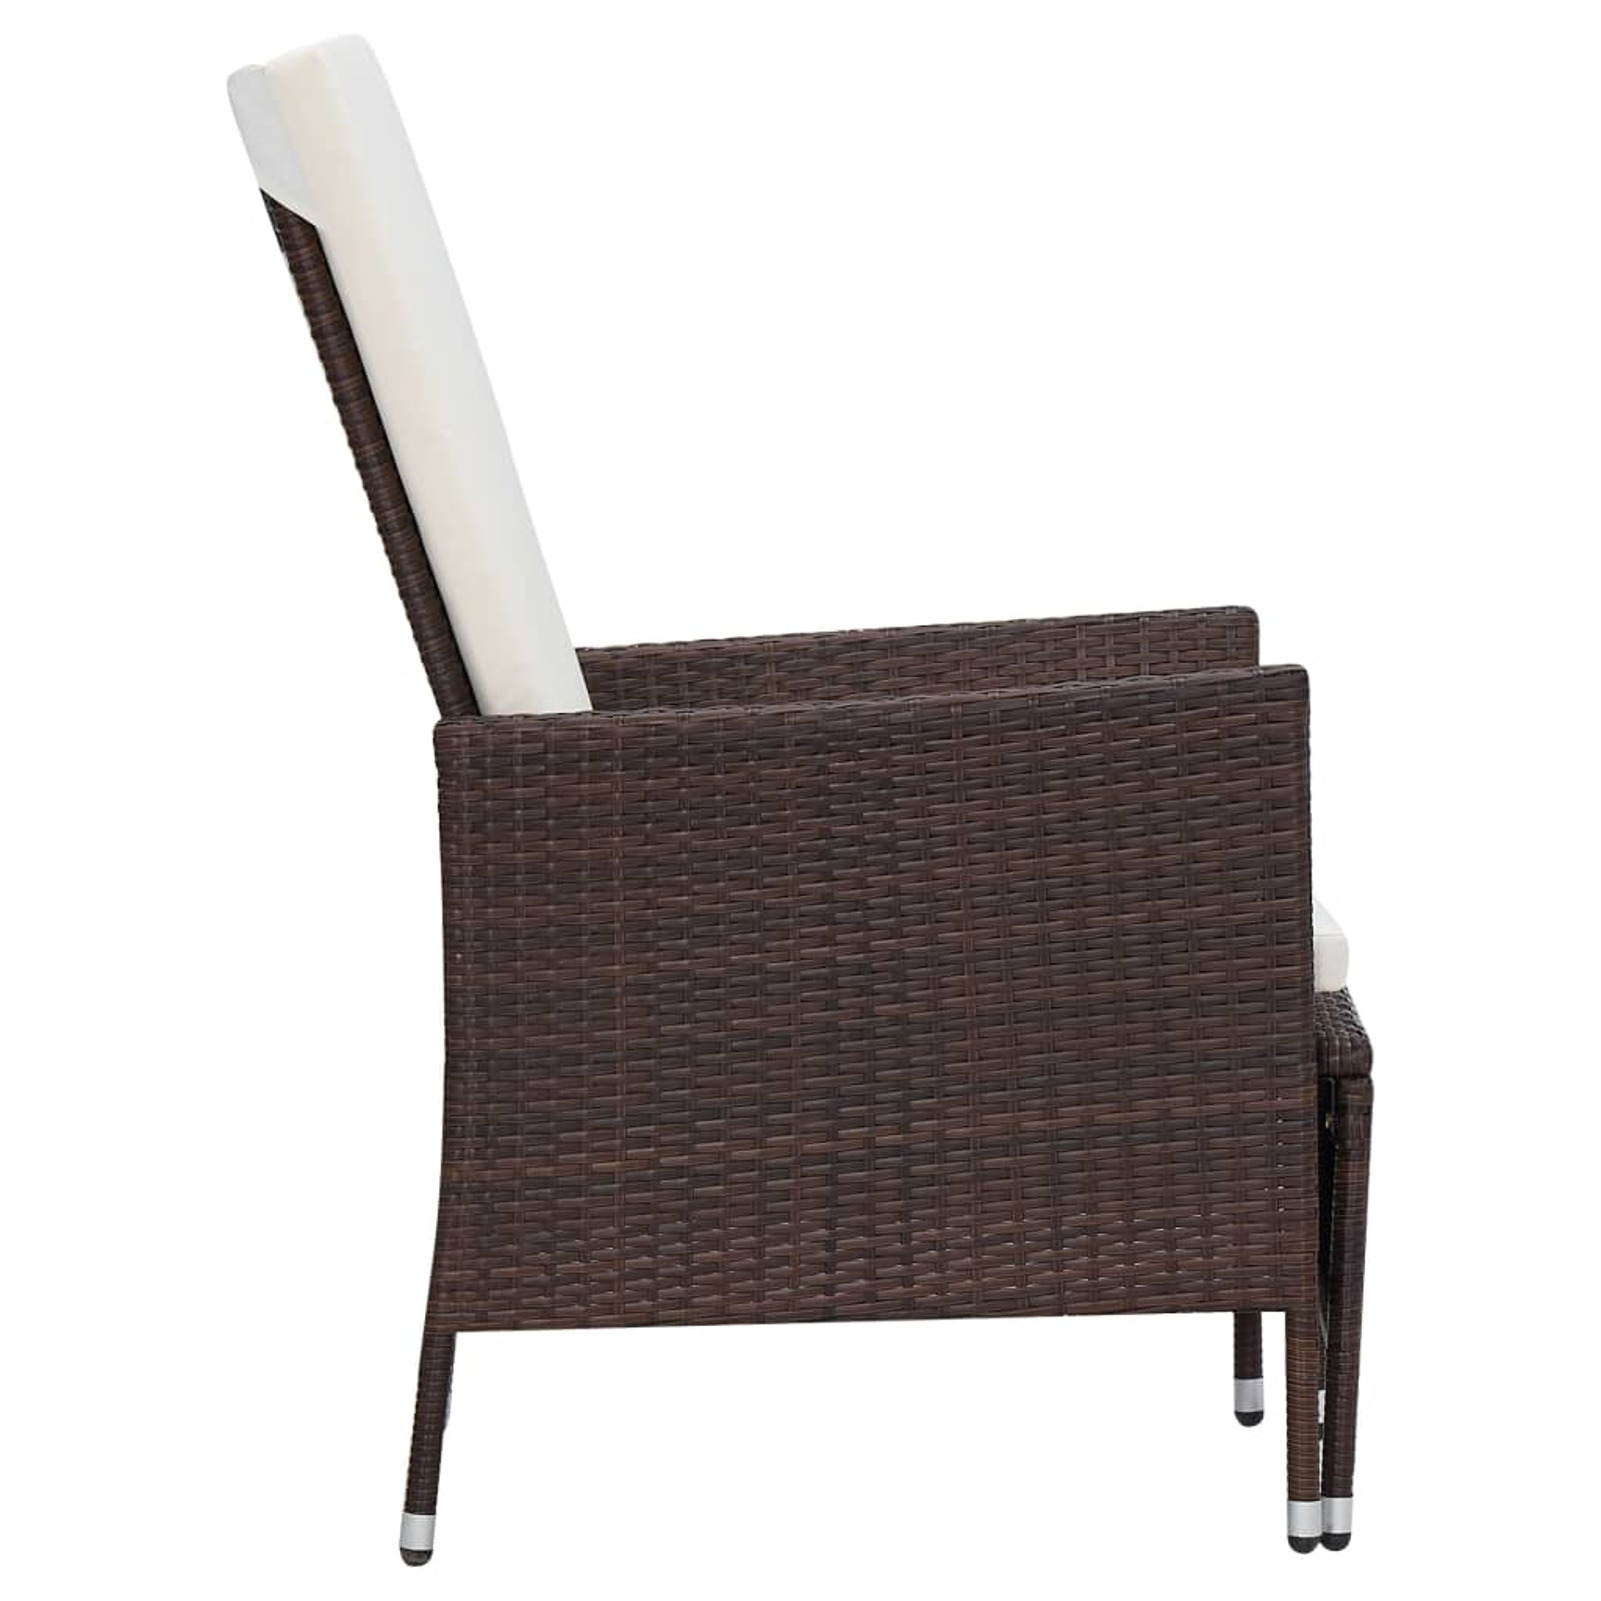 Anself Garden Reclining Chair Brown Poly Rattan Armchair with Padded Cushions and Built-in Footrest Steel Frame for Patio, Poolside, Backyard, Balcony Outdoor Furniture - image 4 of 7